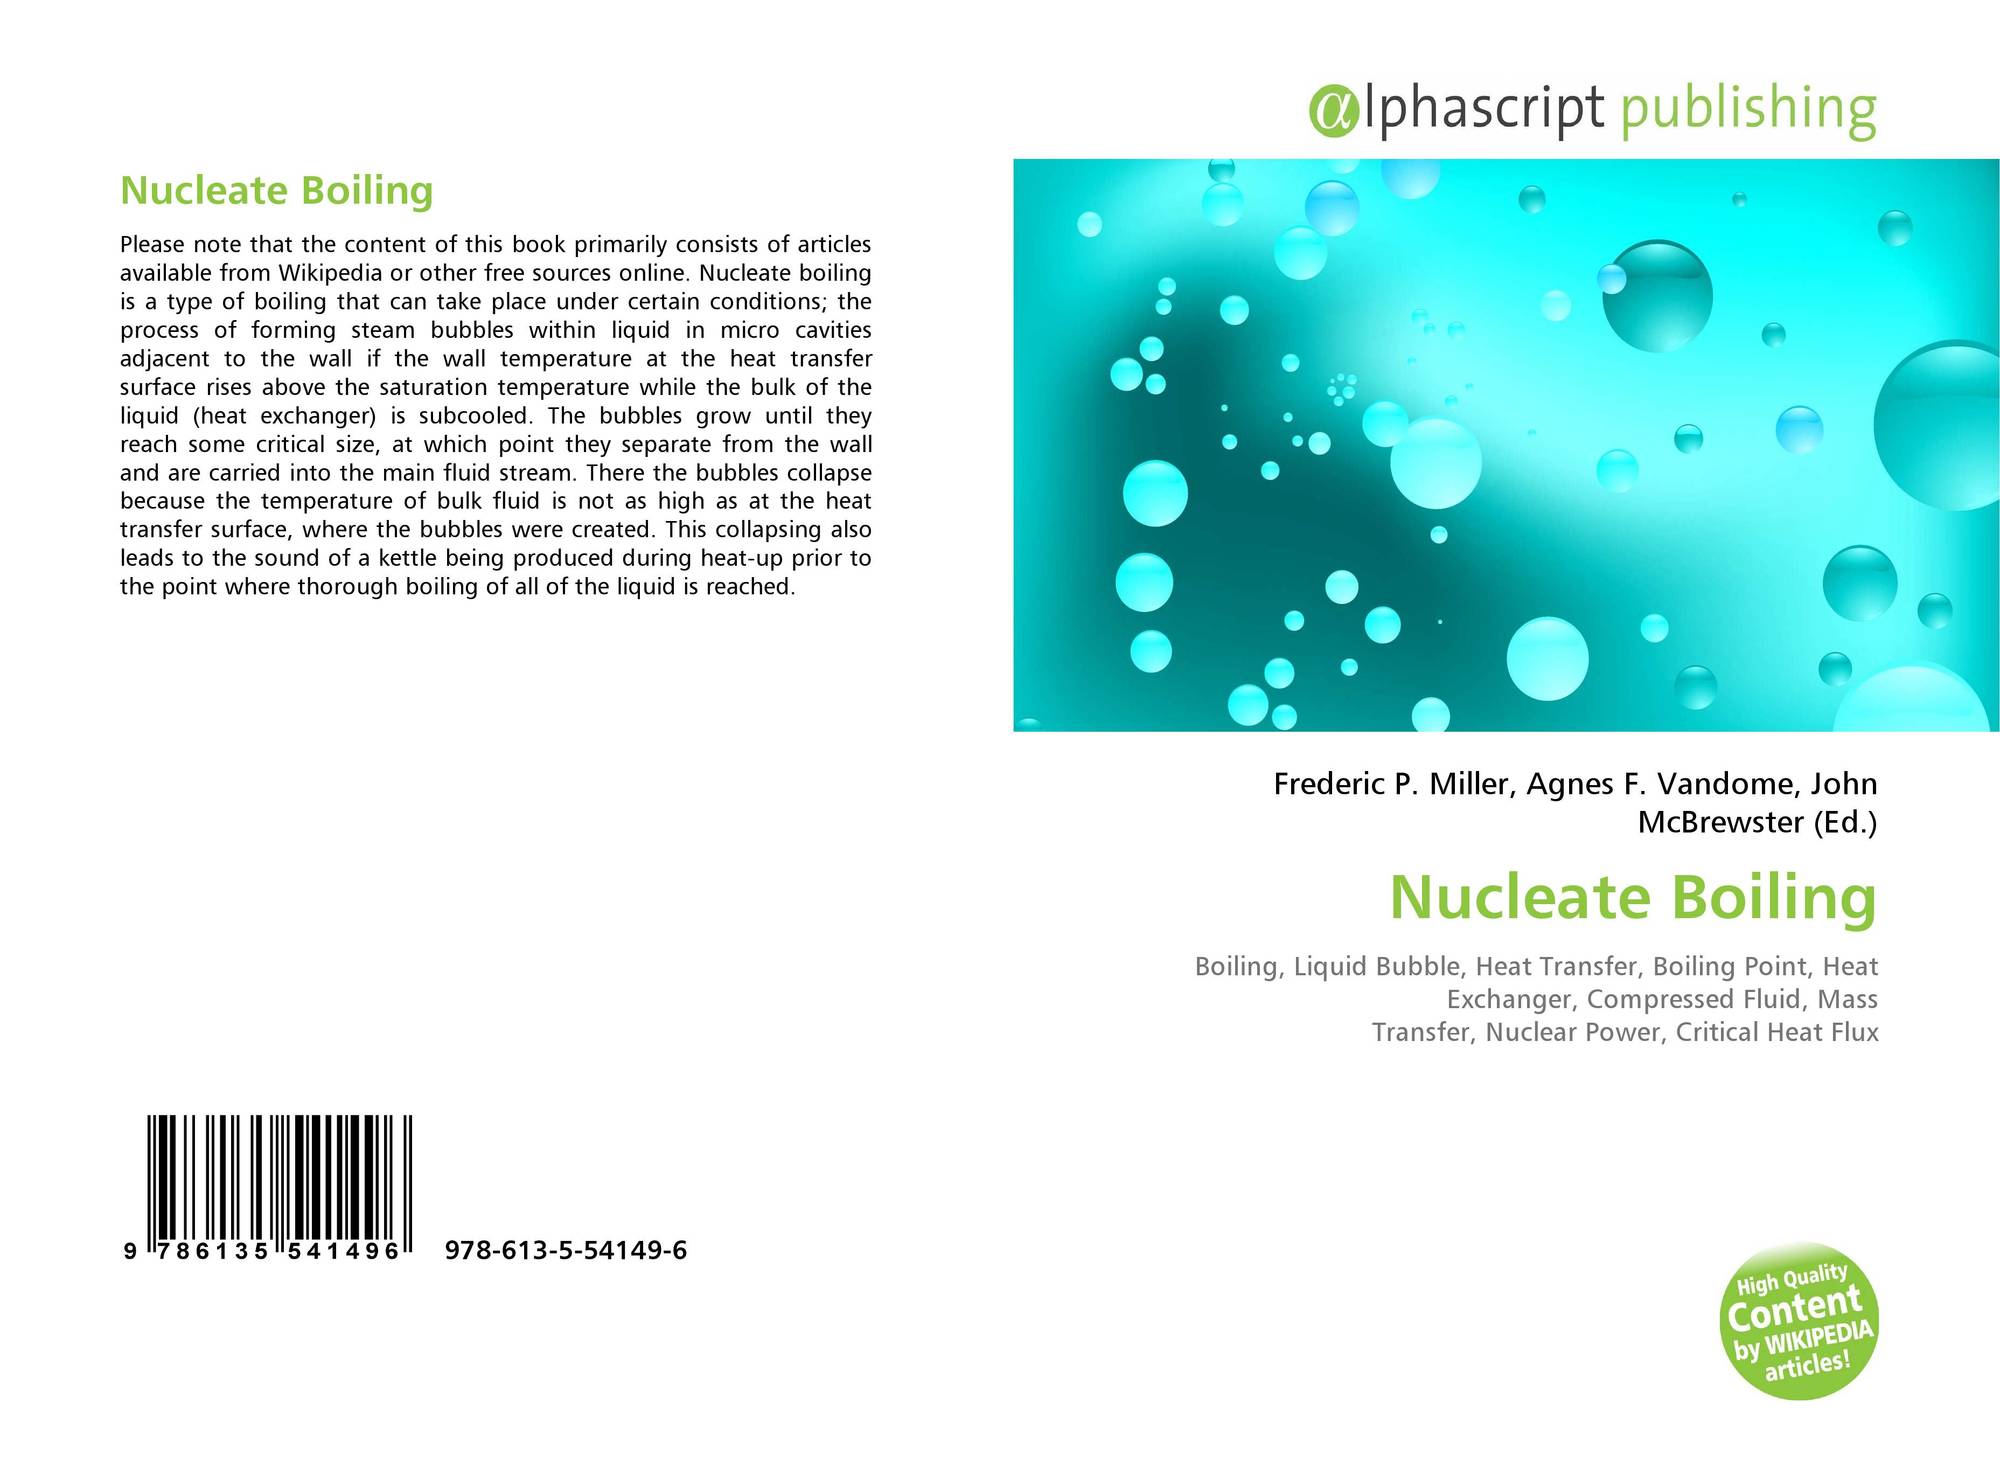 Nucleate boiling